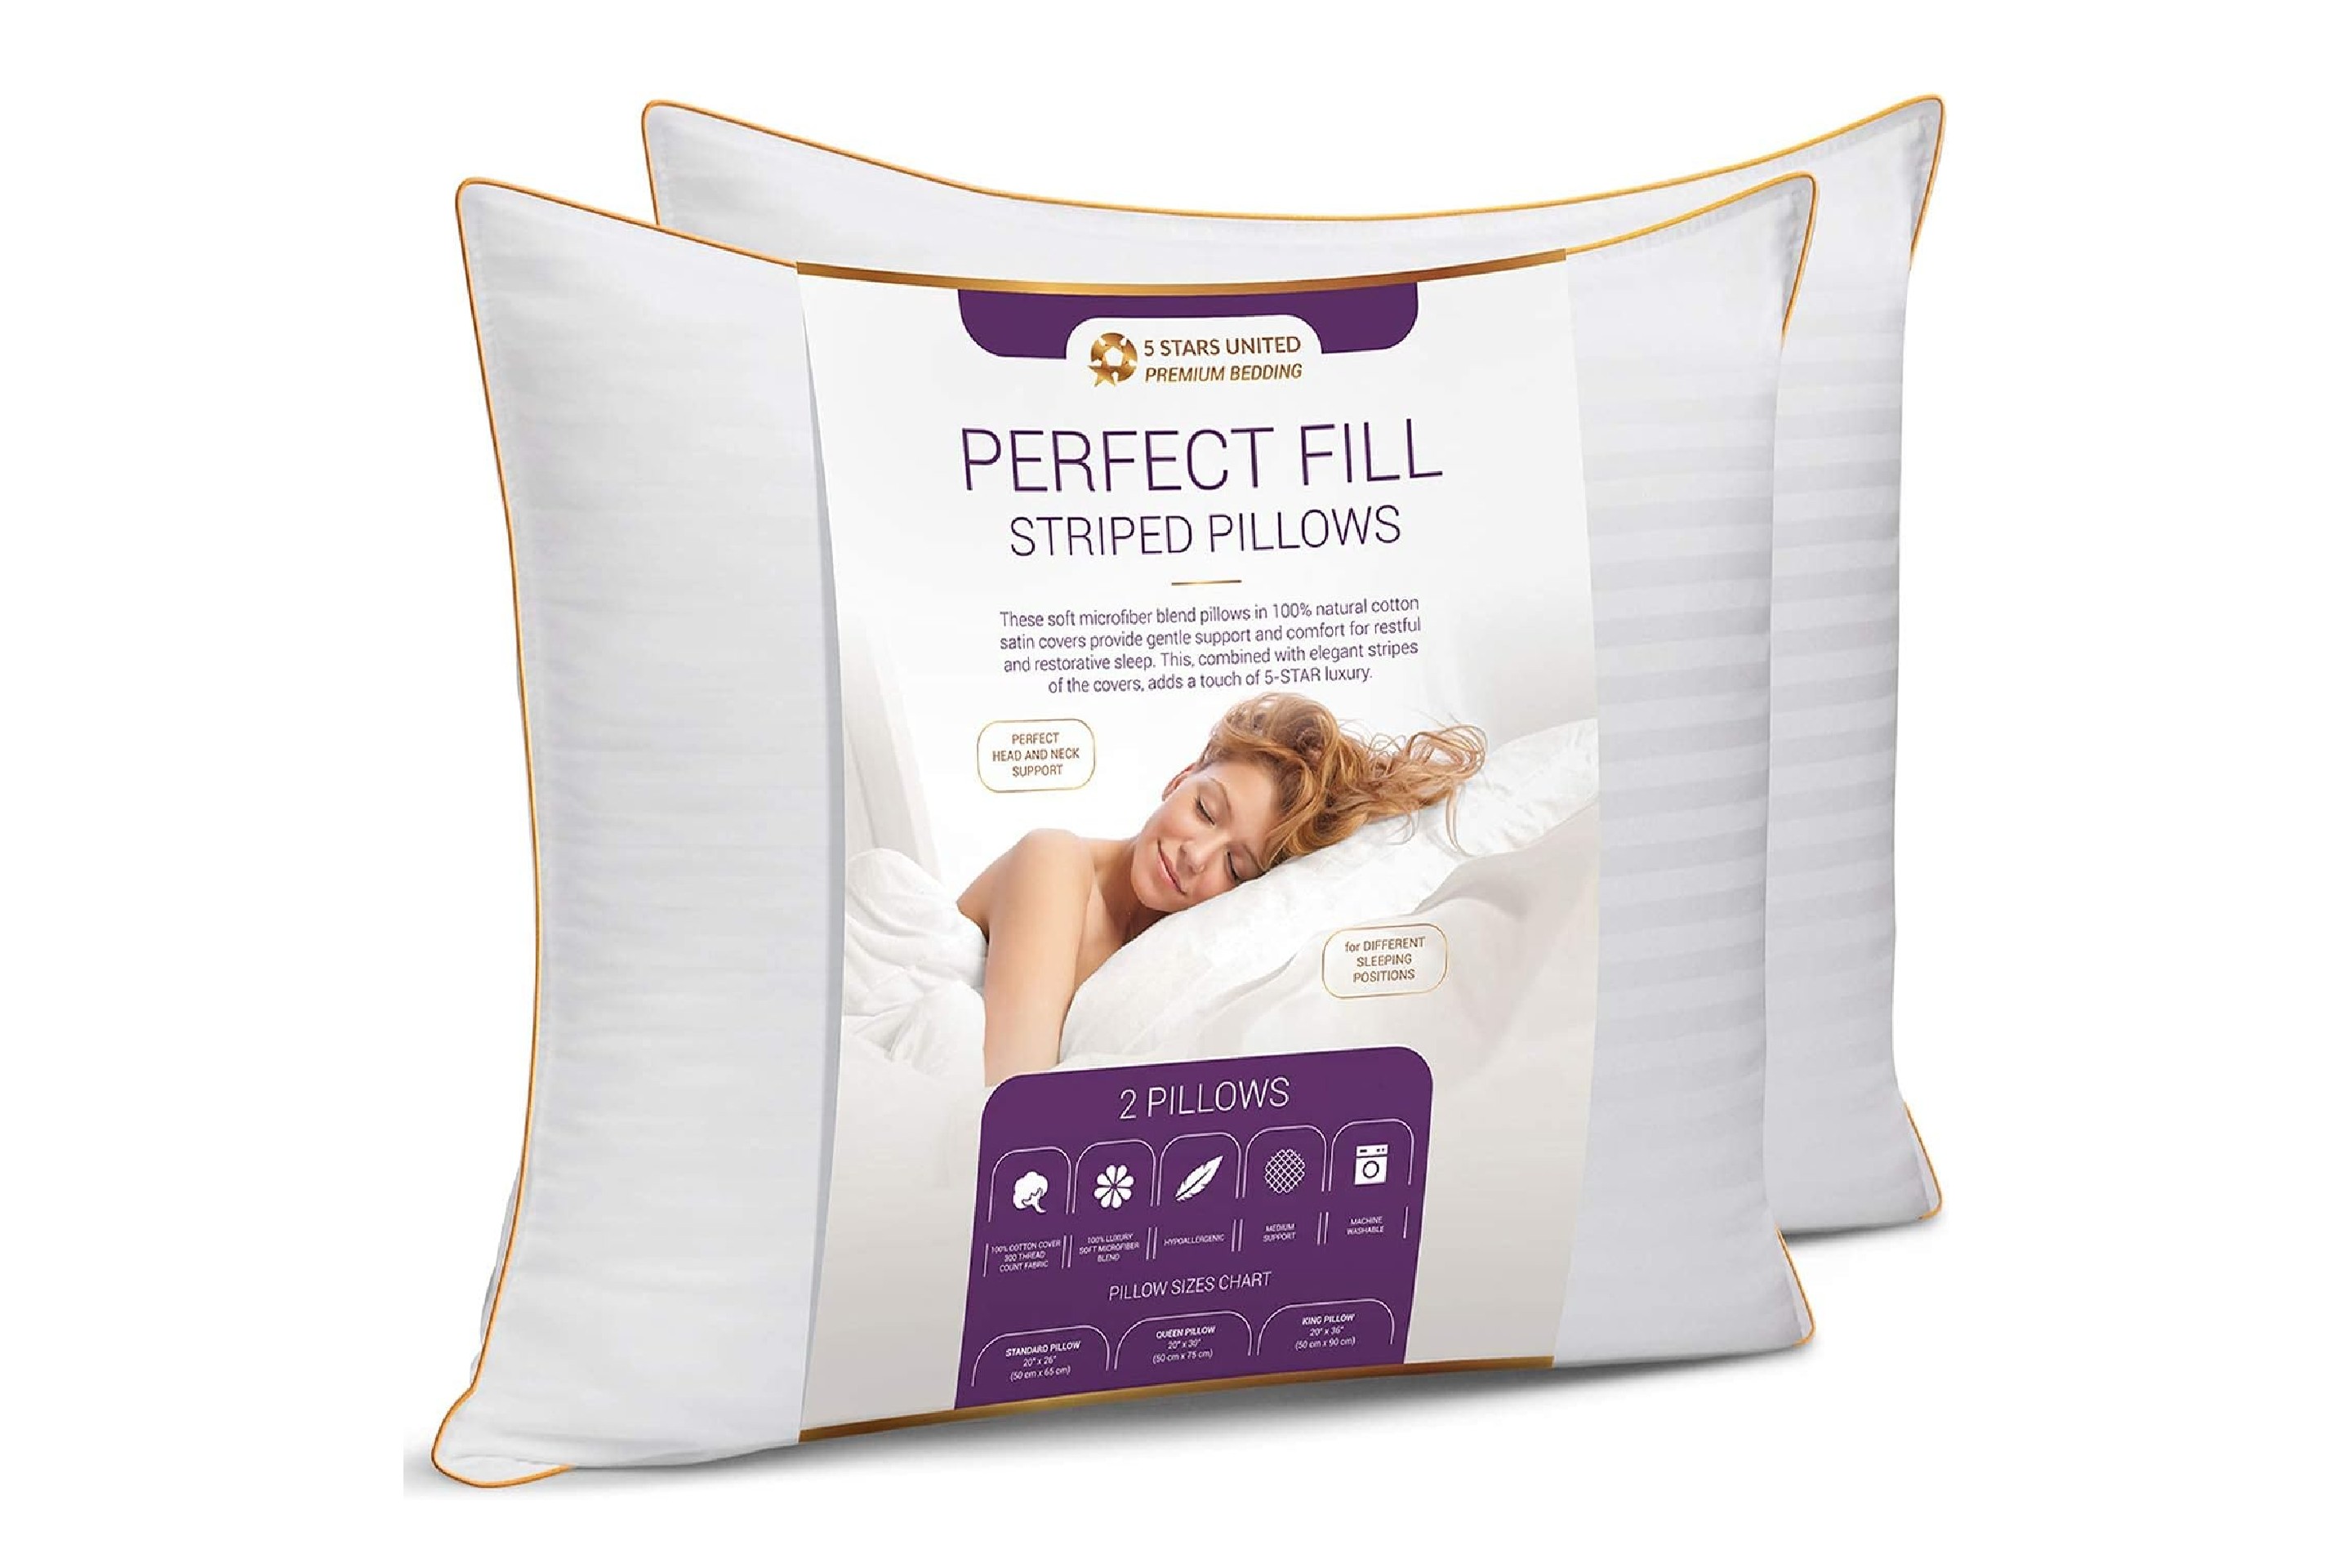 5 STARS UNITED Pillow For Airplane